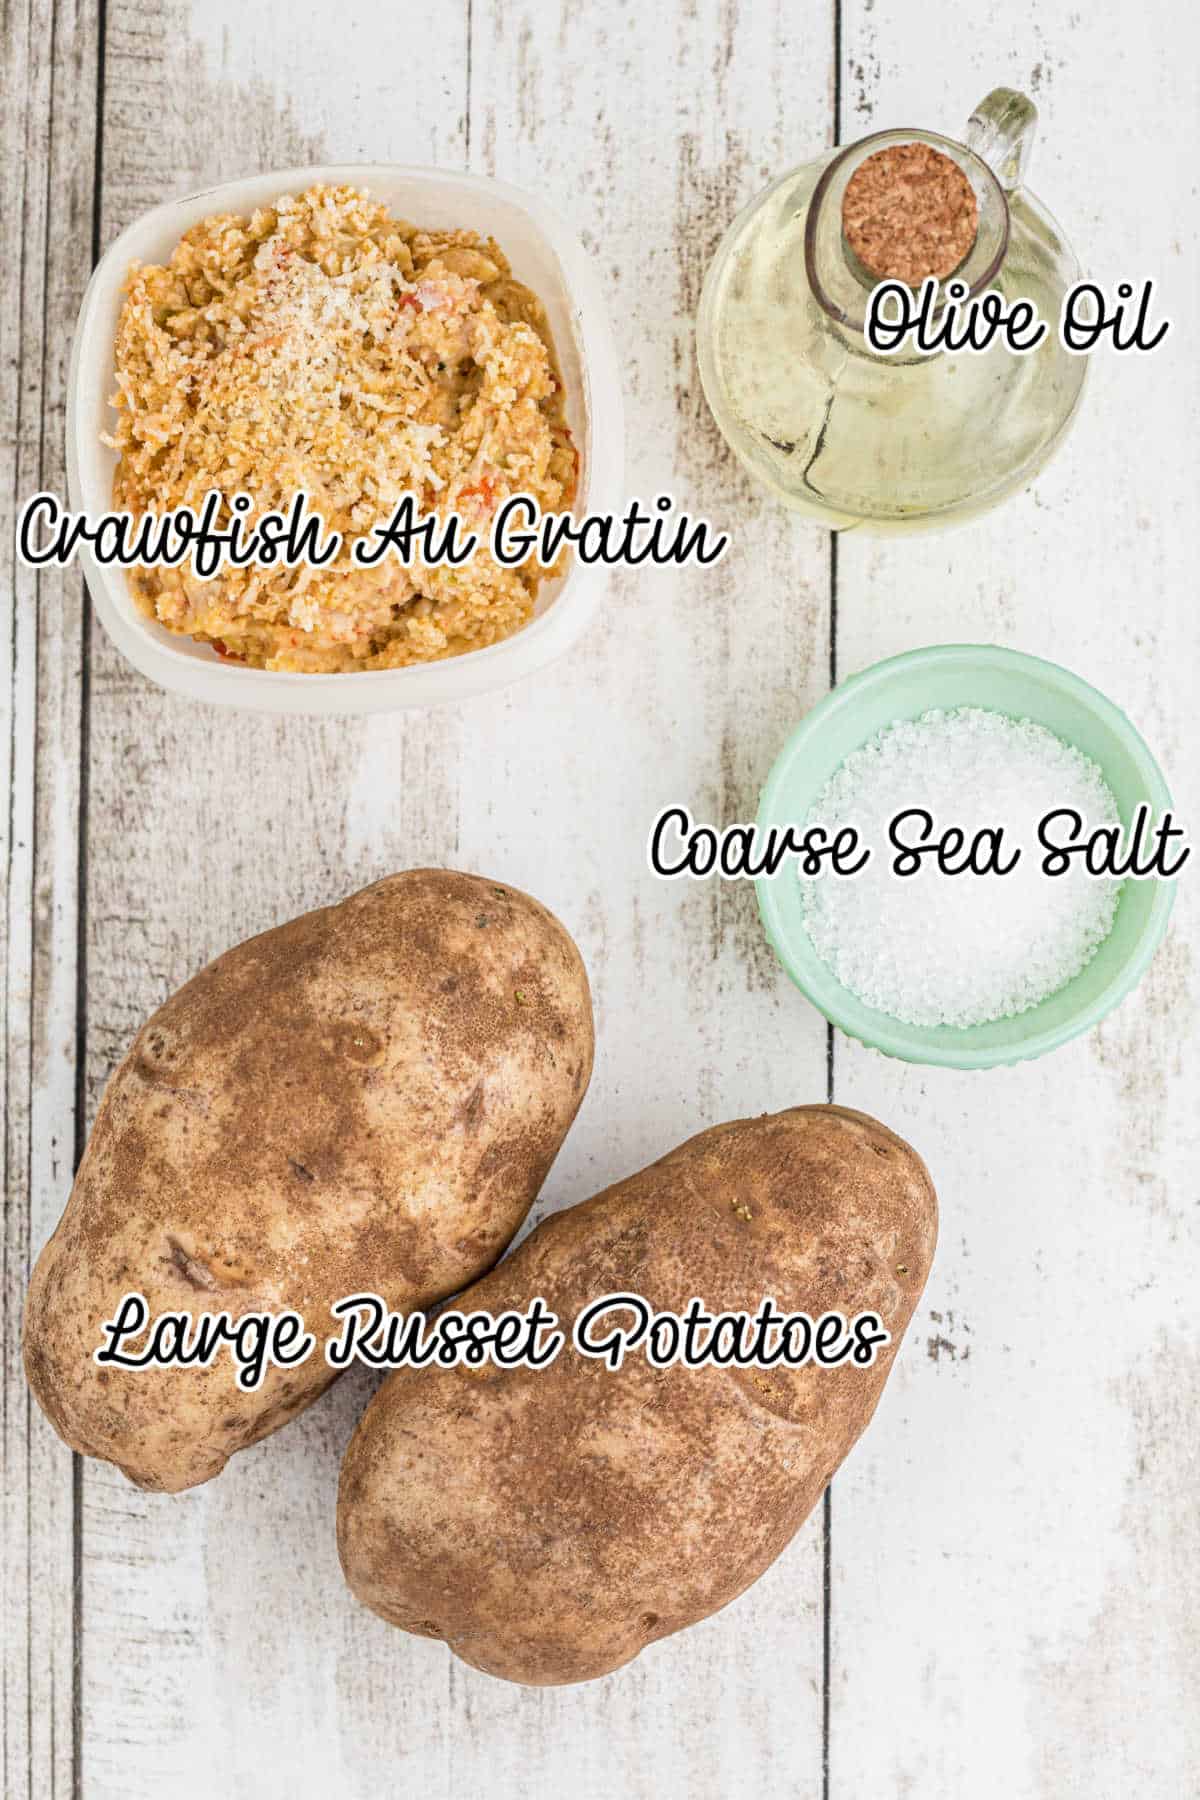 Ingredients laid out with text overlay showing what is needed for a crawfish baked potato.